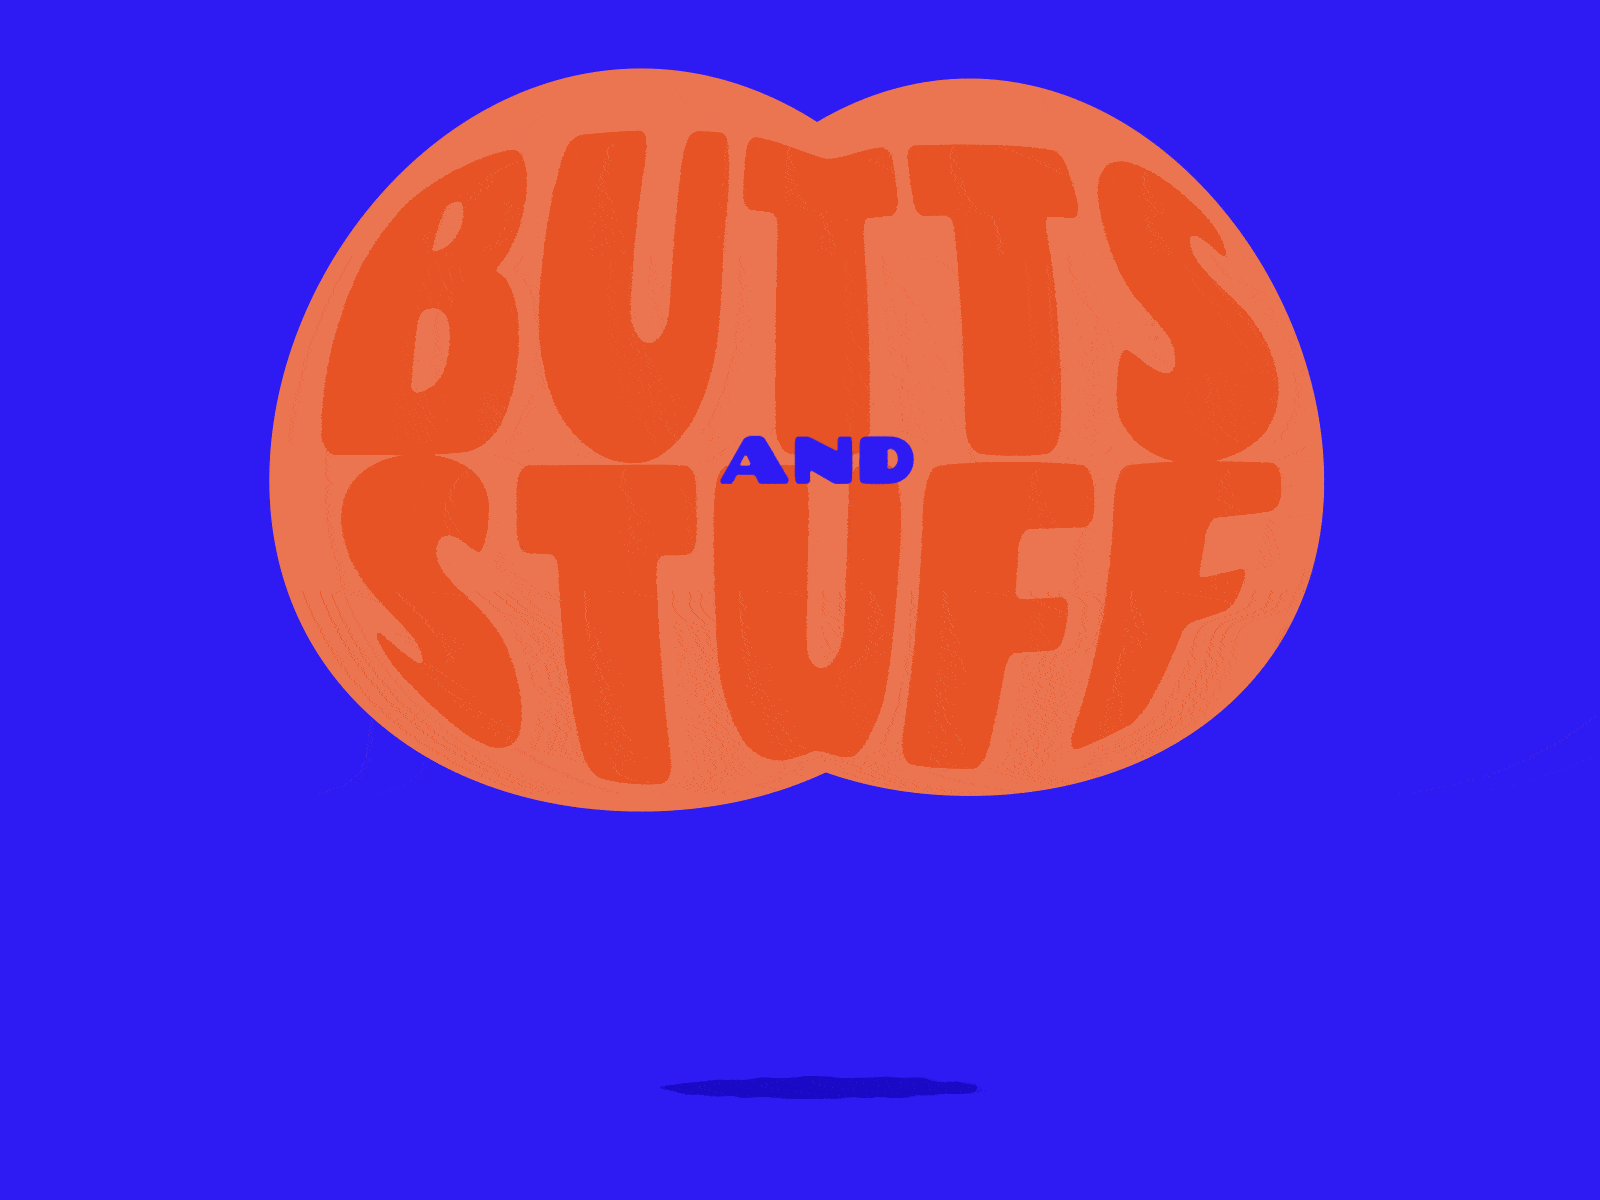 Butts and Stuff